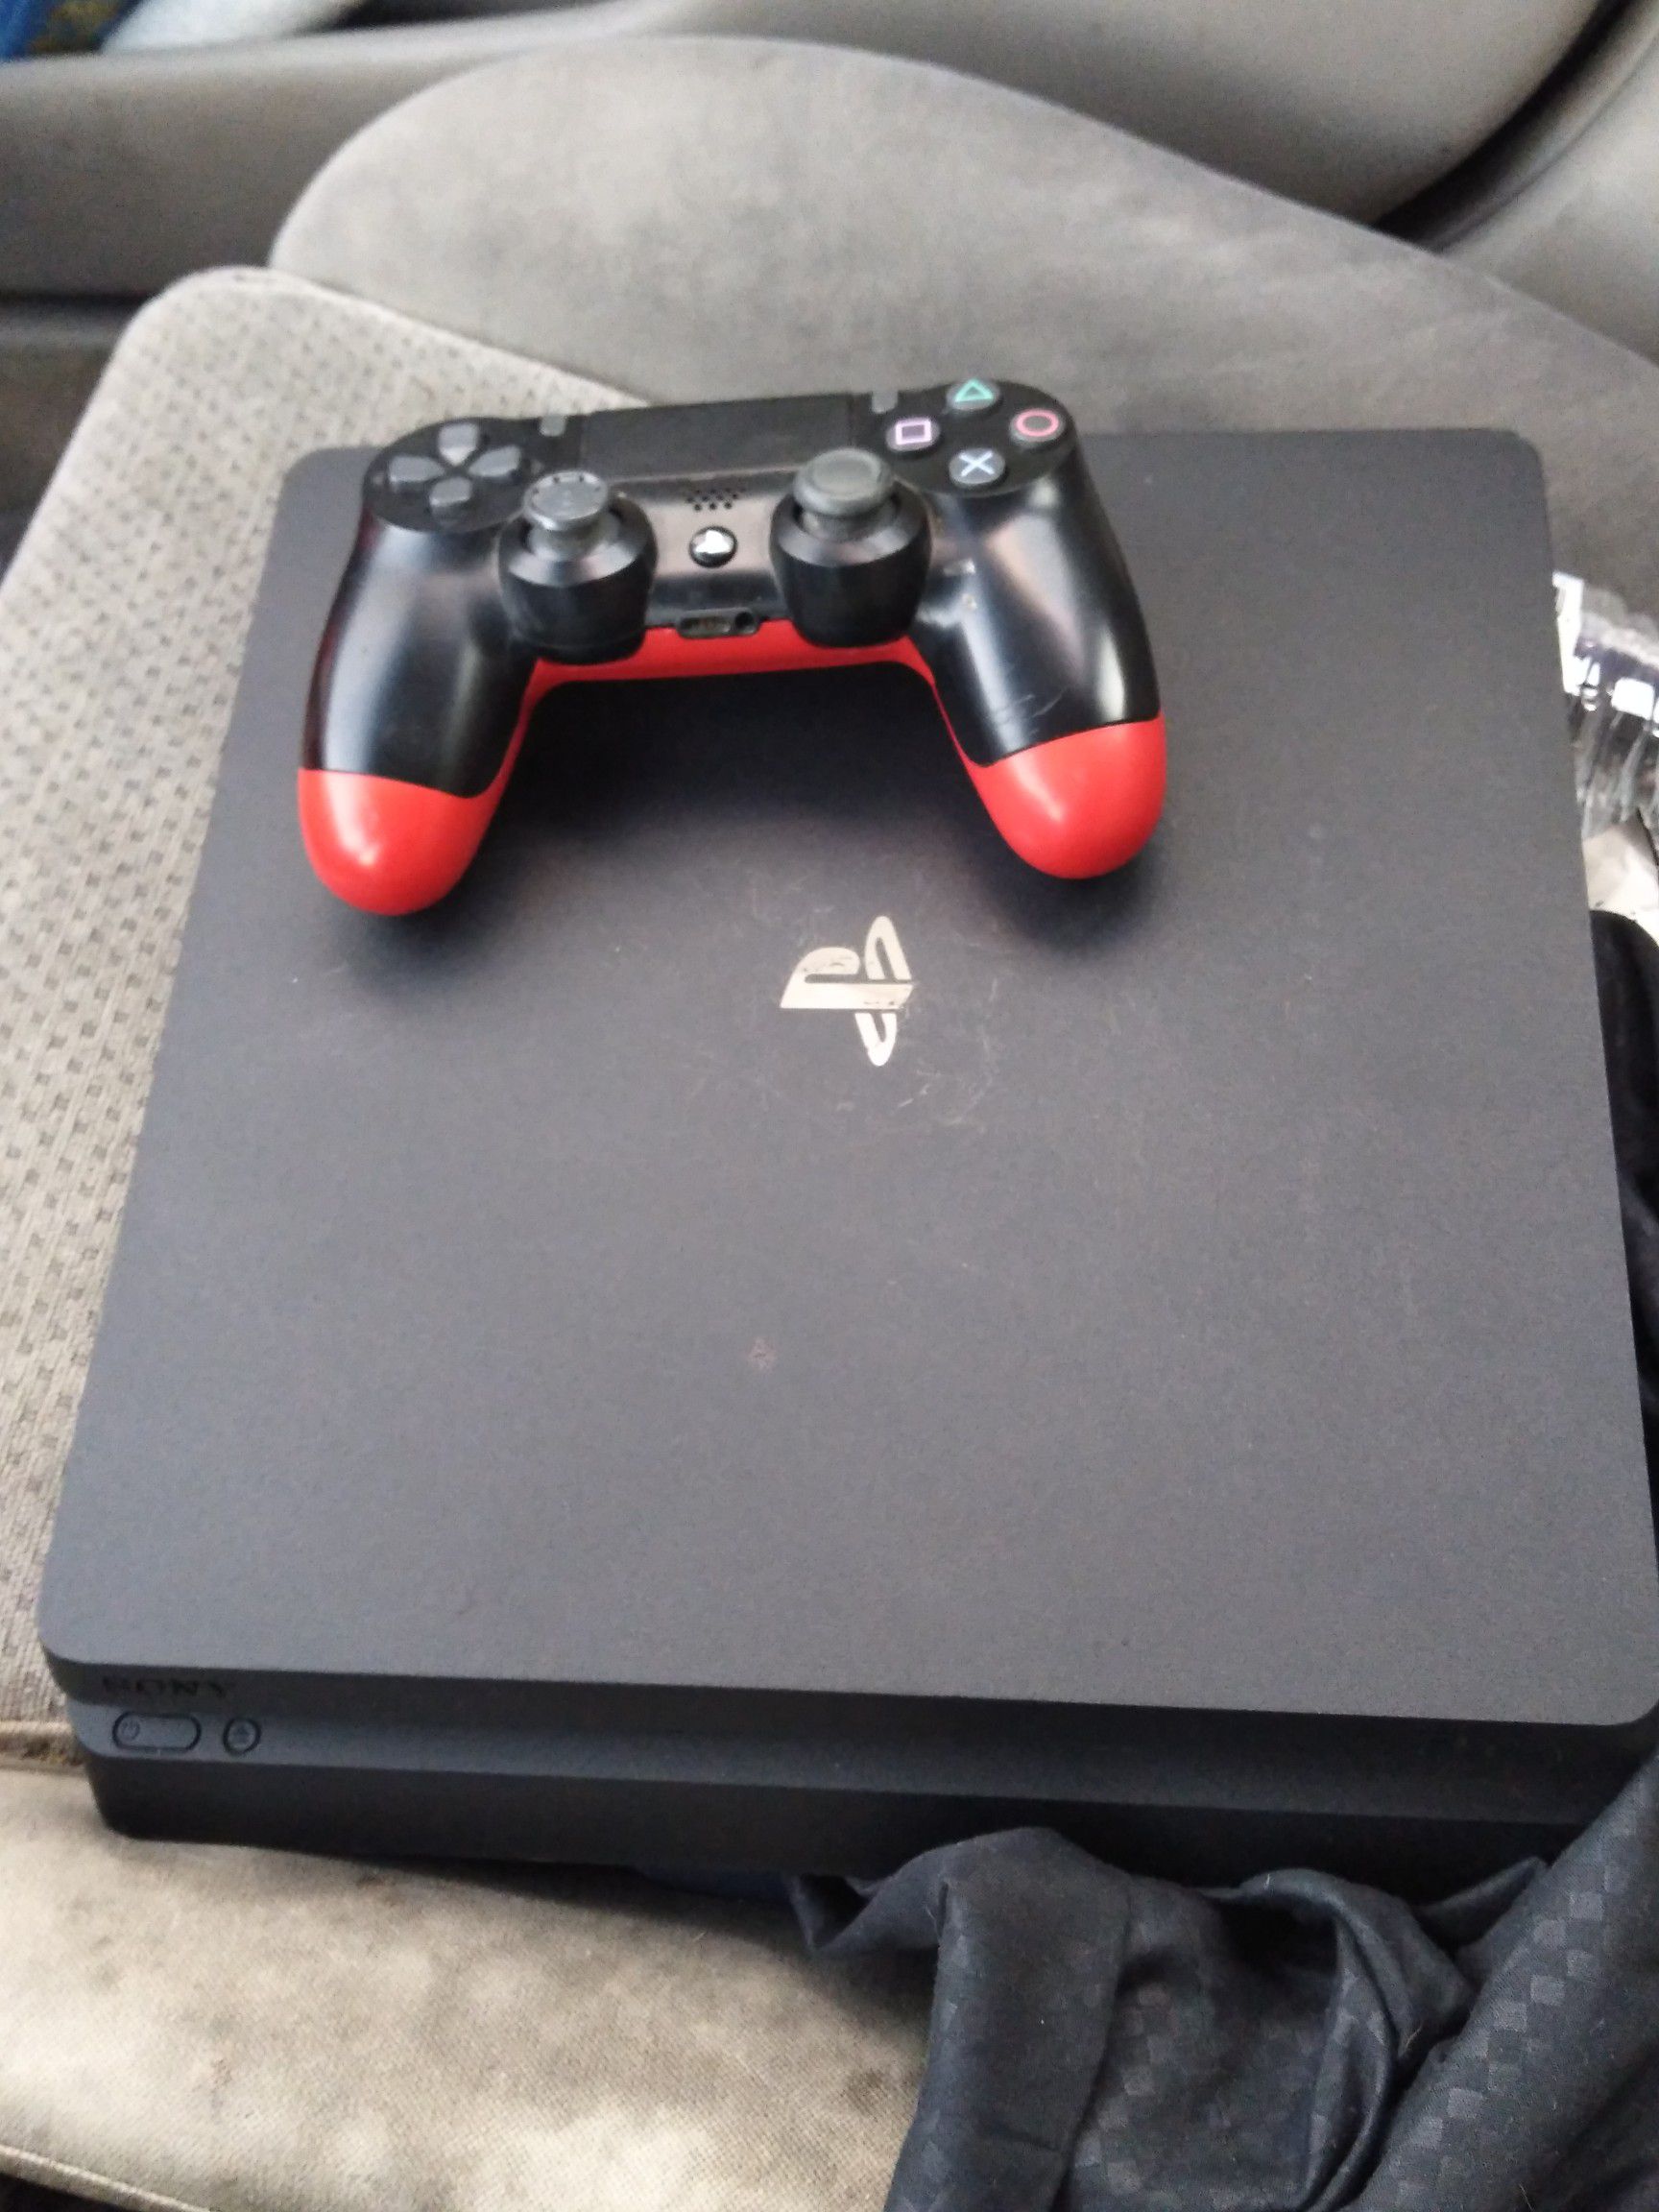 Ps4 slim hardly ever used